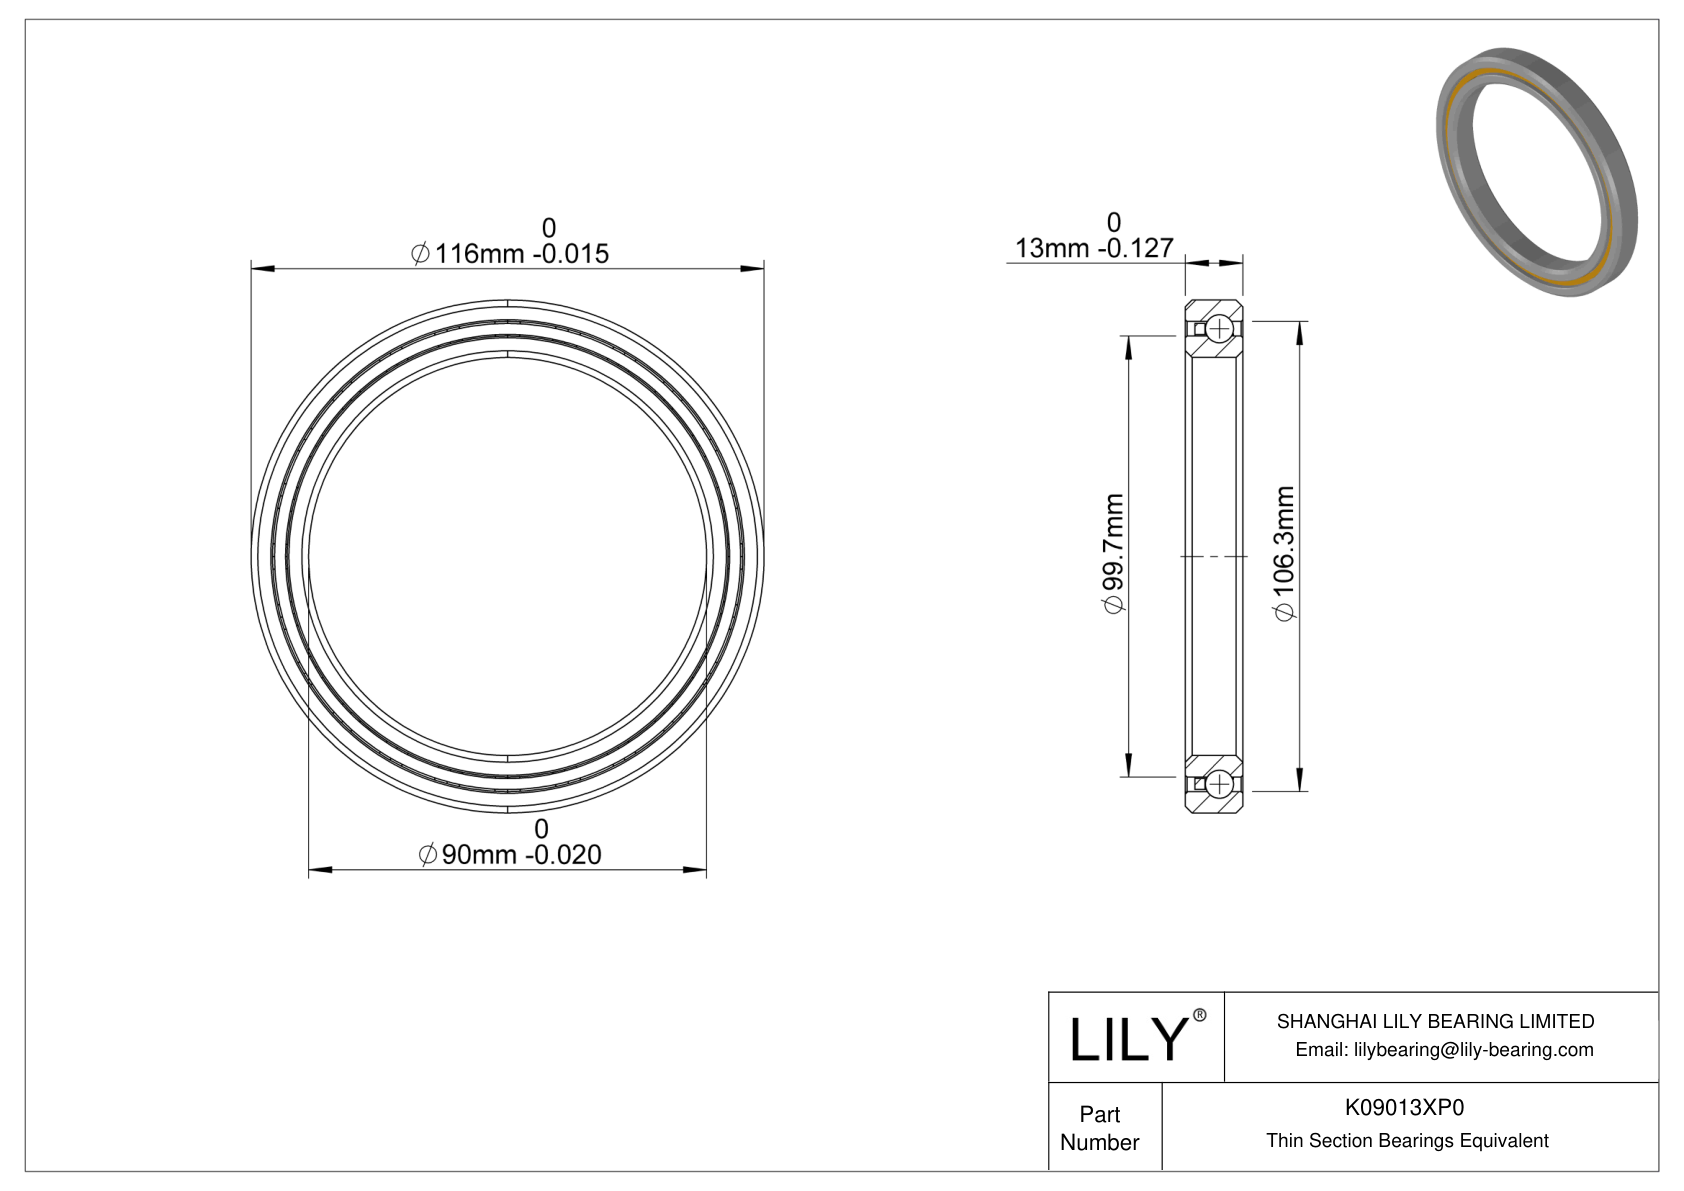 K09013XP0 Constant Section (CS) Bearings cad drawing